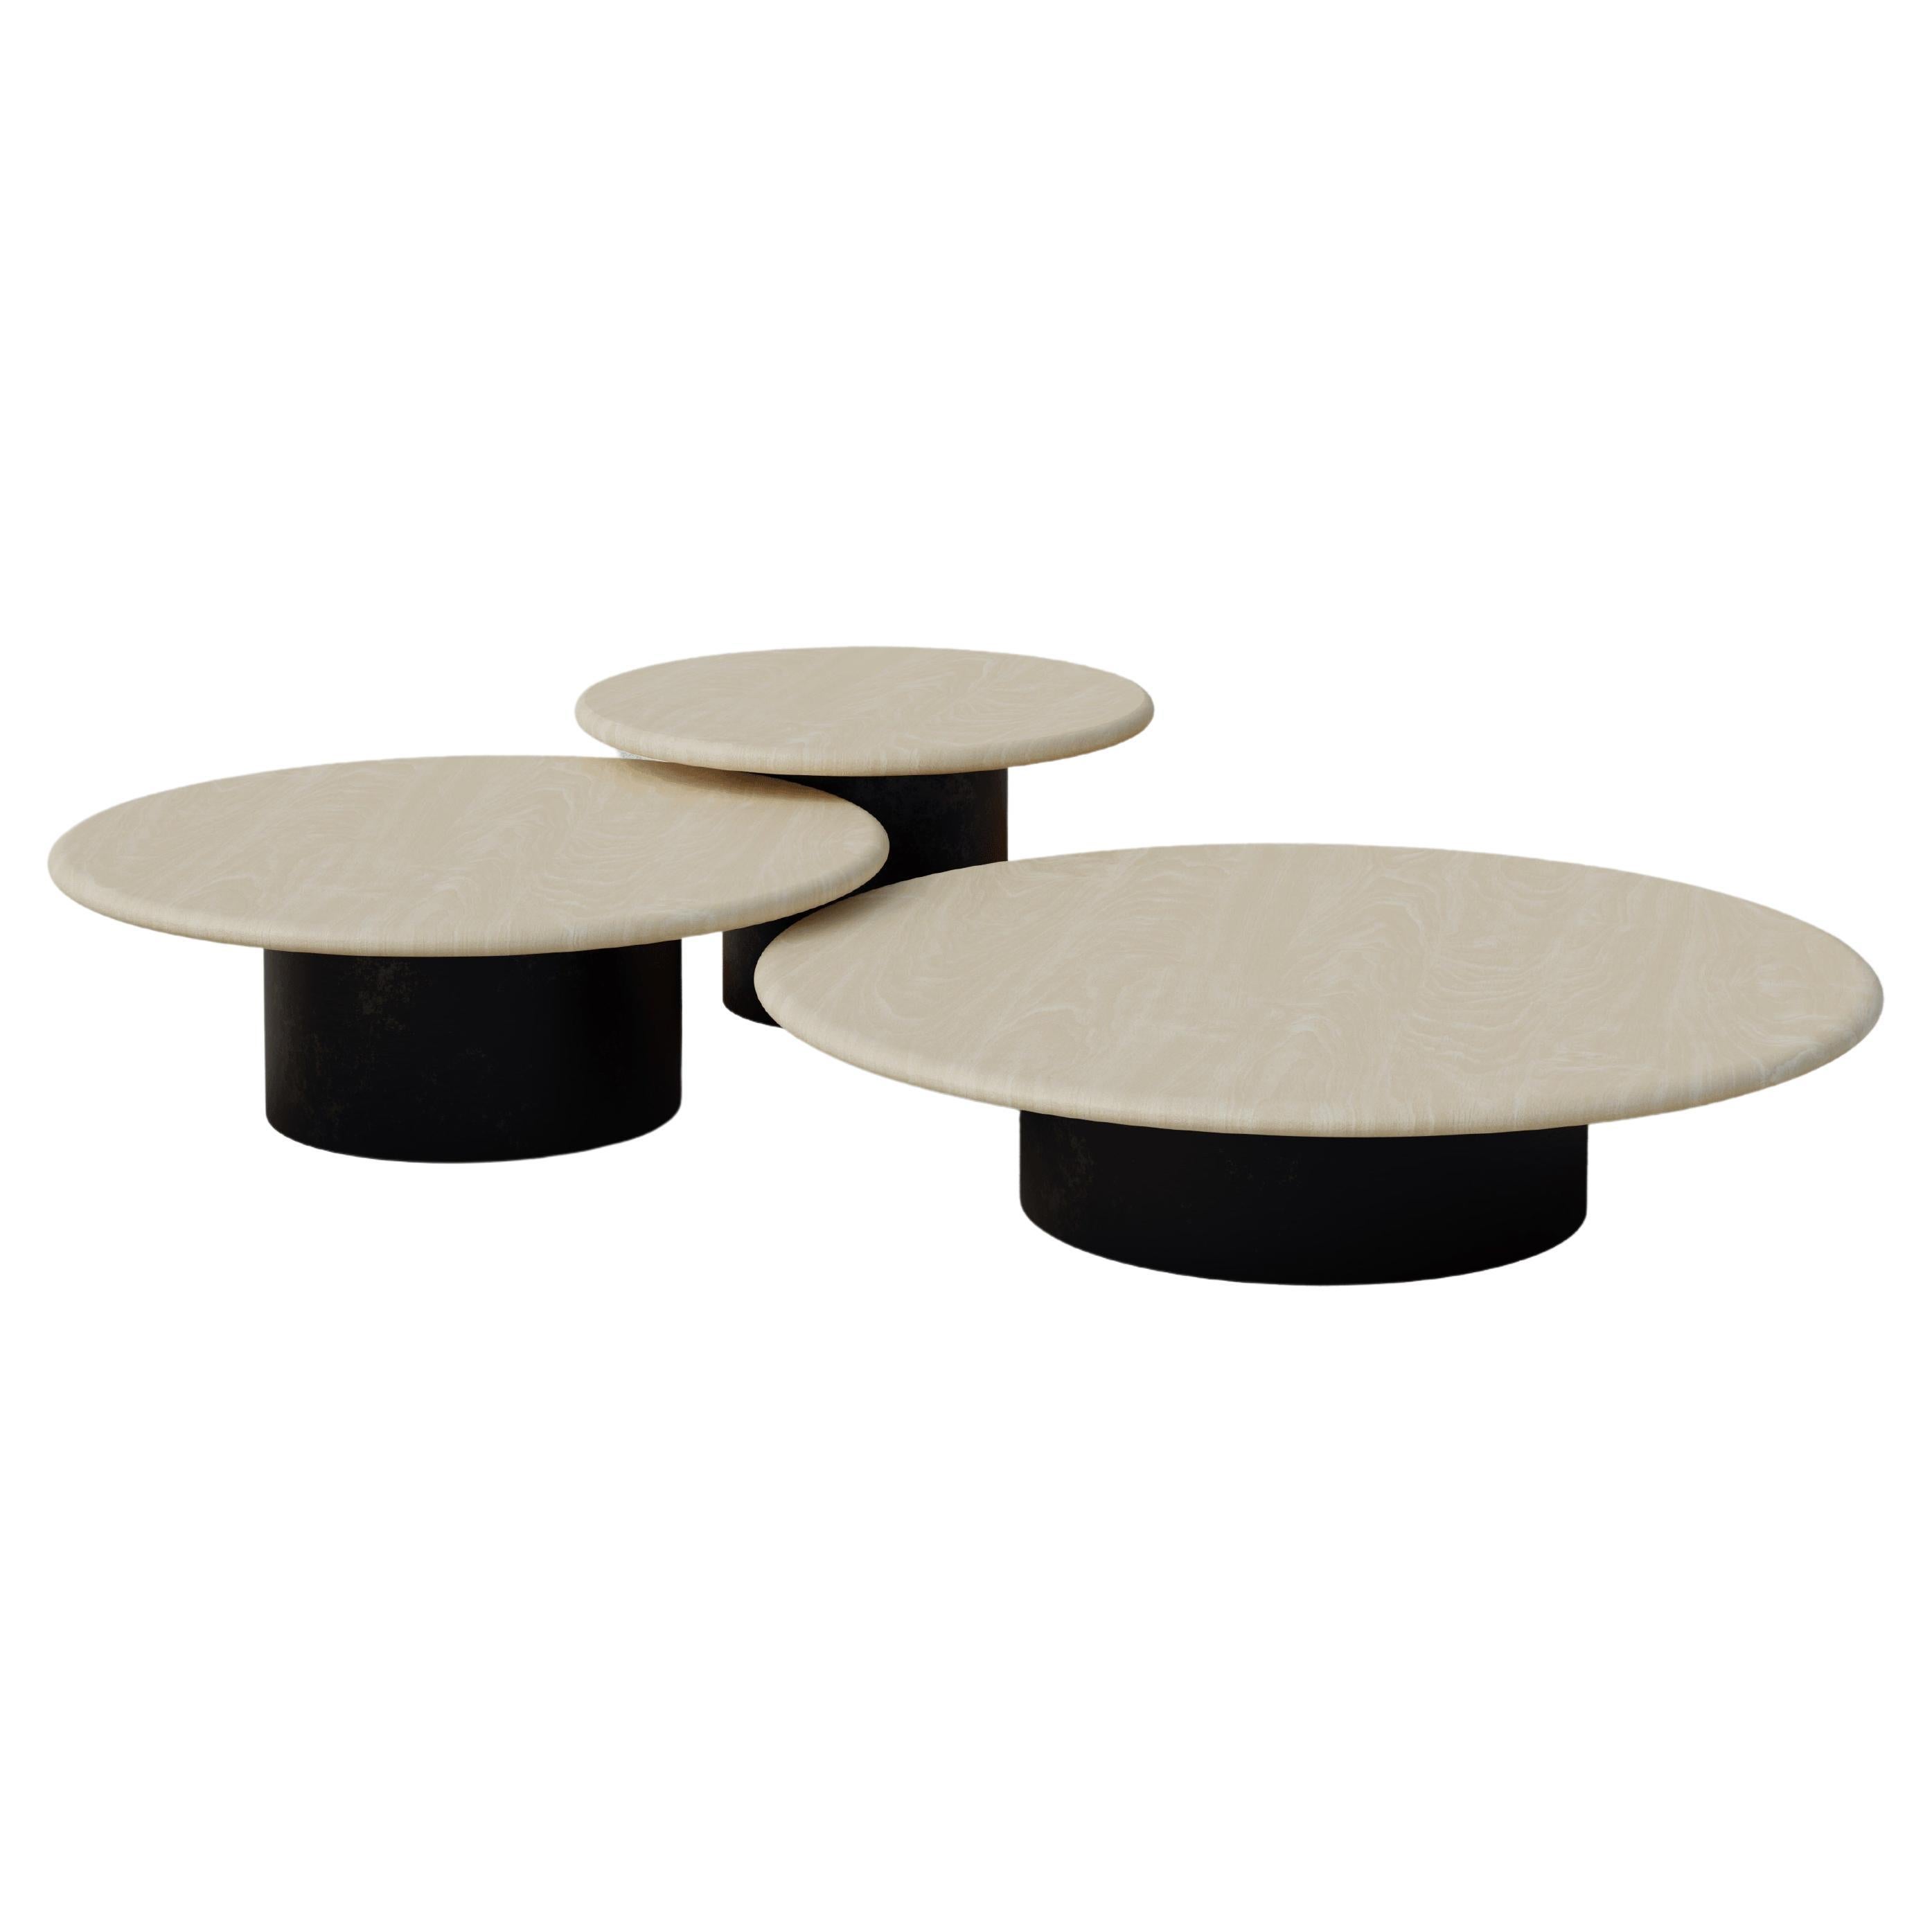 Raindrop Coffee Table Set, 600, 800, 1000, Ash / Patinated For Sale